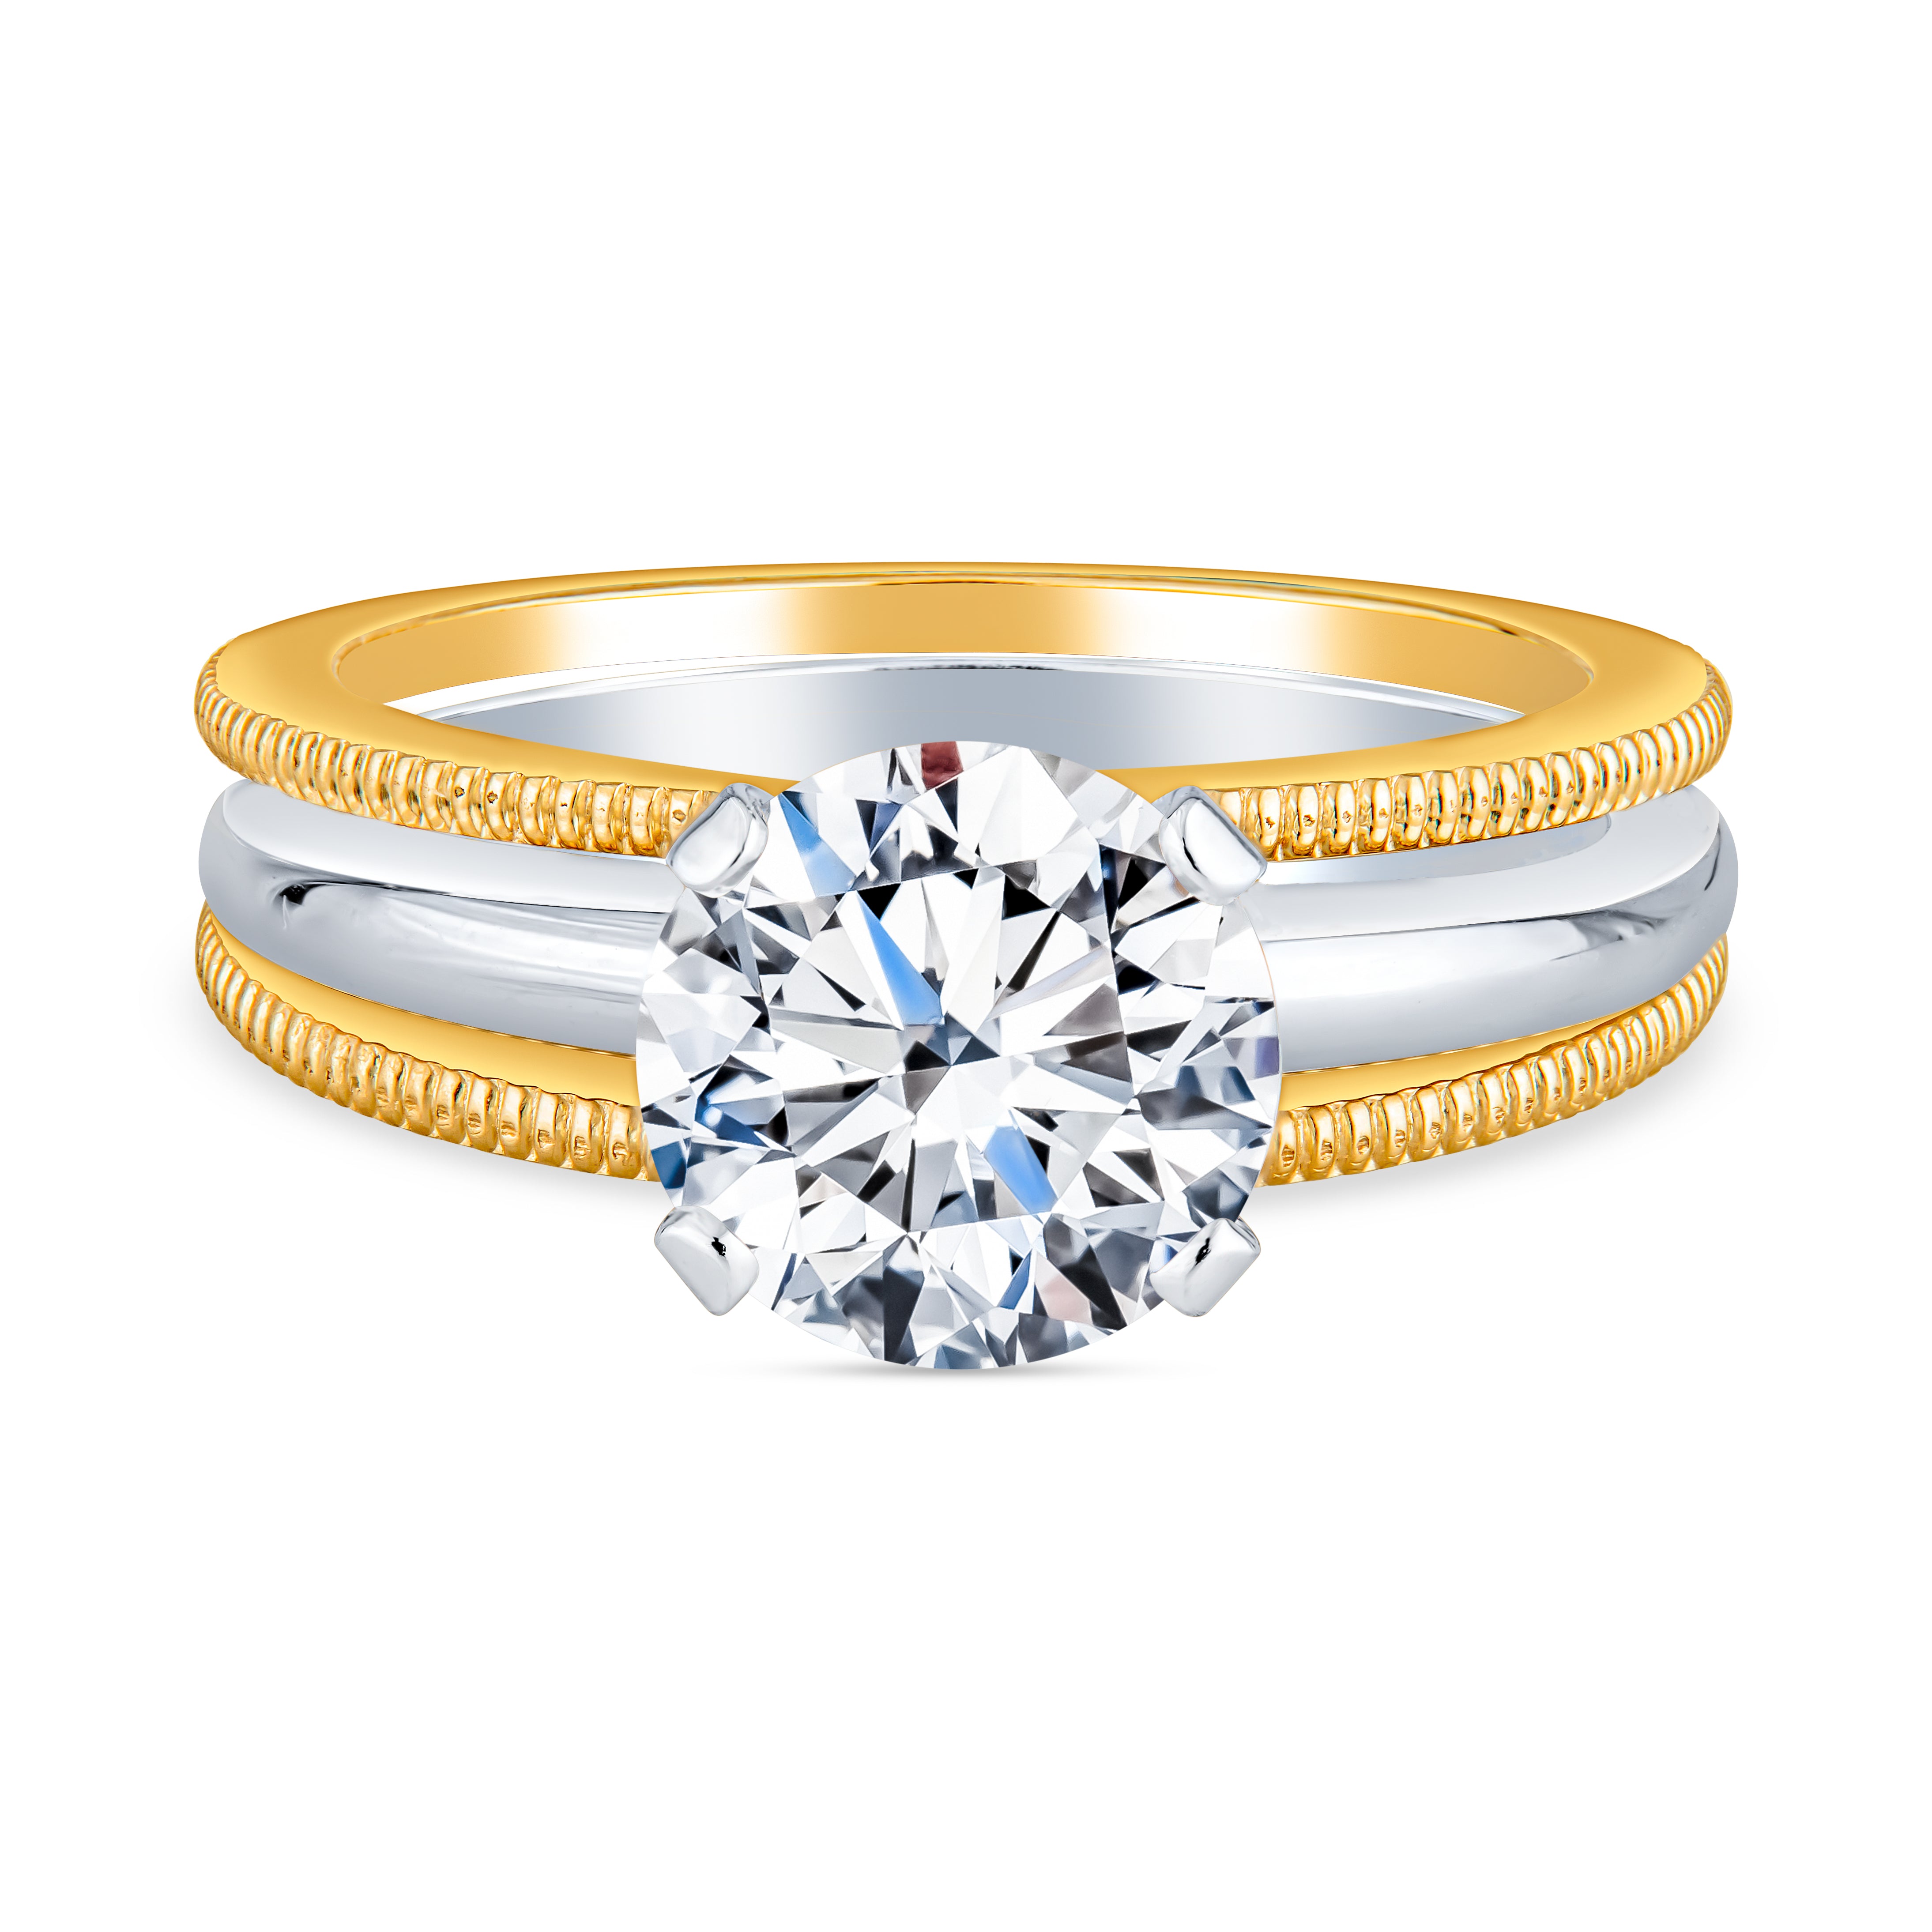 Check Out These Simple Engagement Rings to Win Her Heart